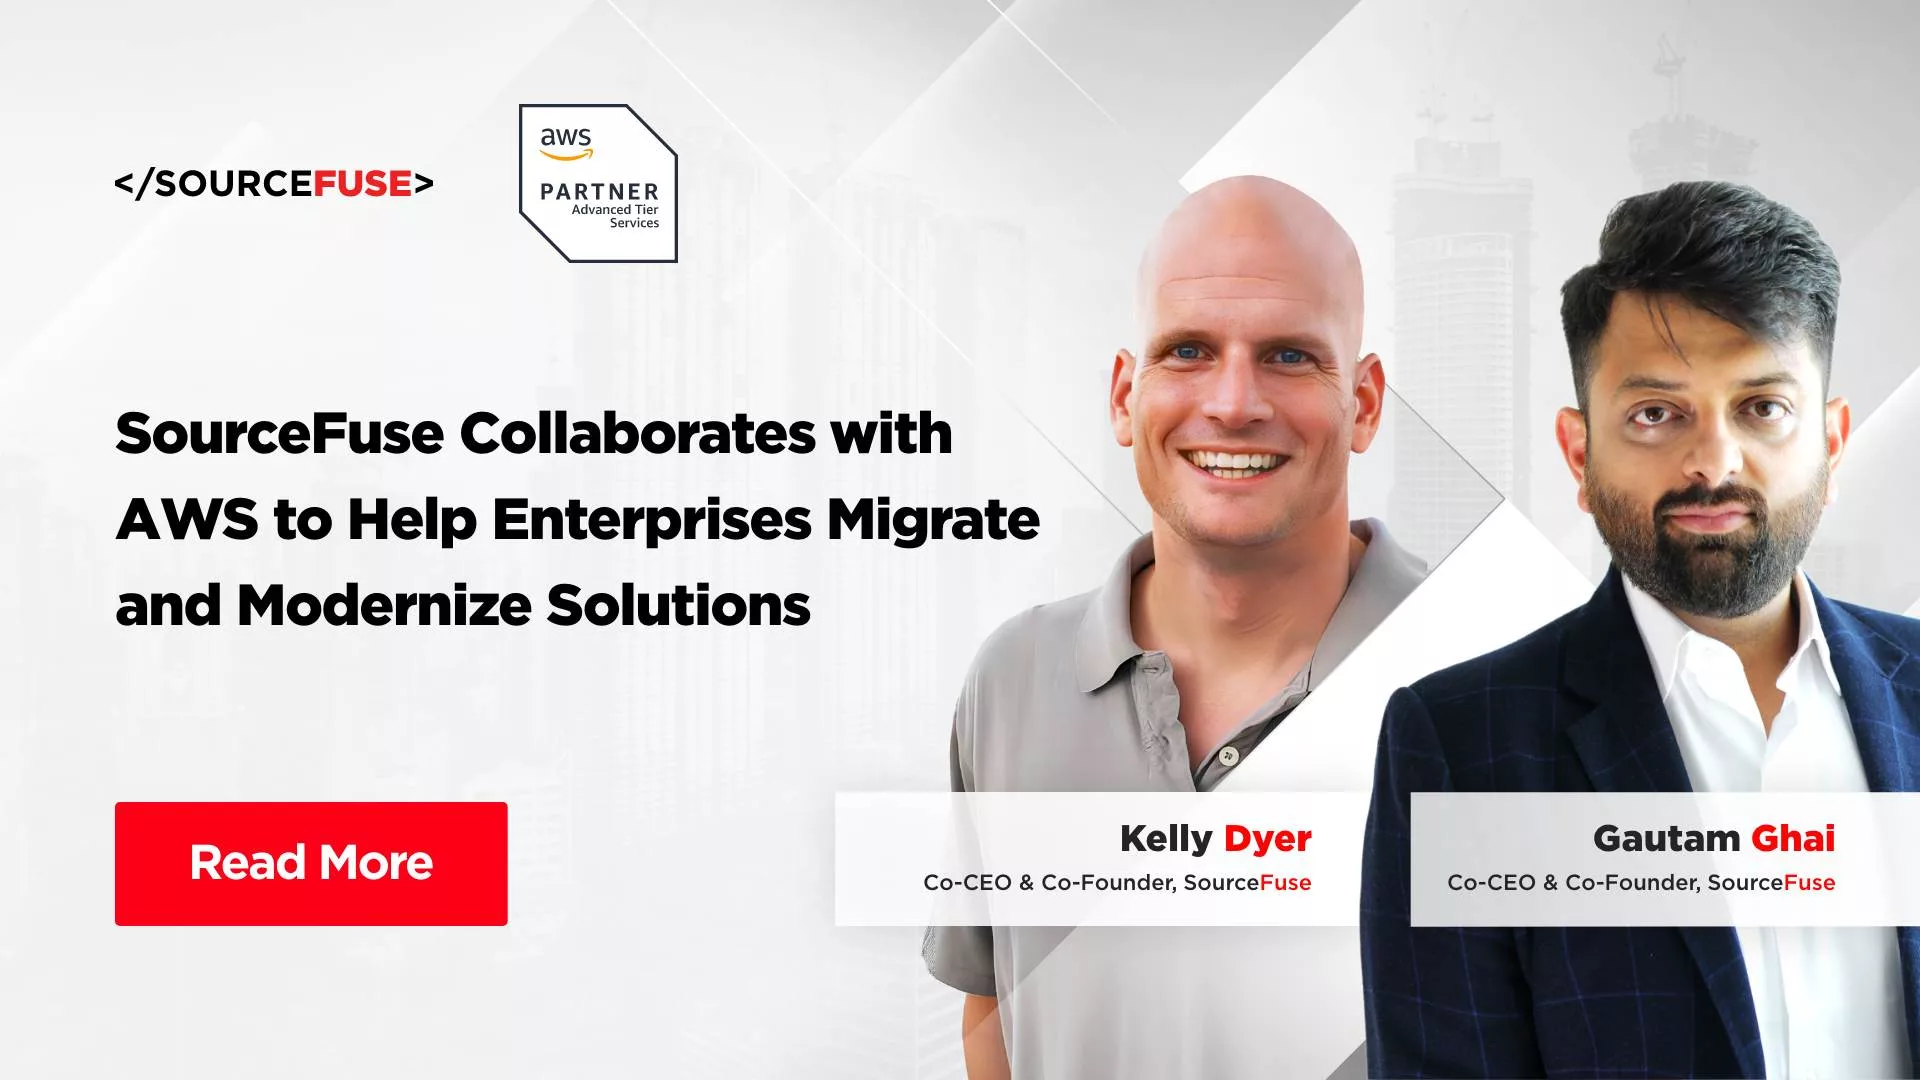 SourceFuse Collaborates with AWS to Help Enterprises Migrate and Modernize Solutions